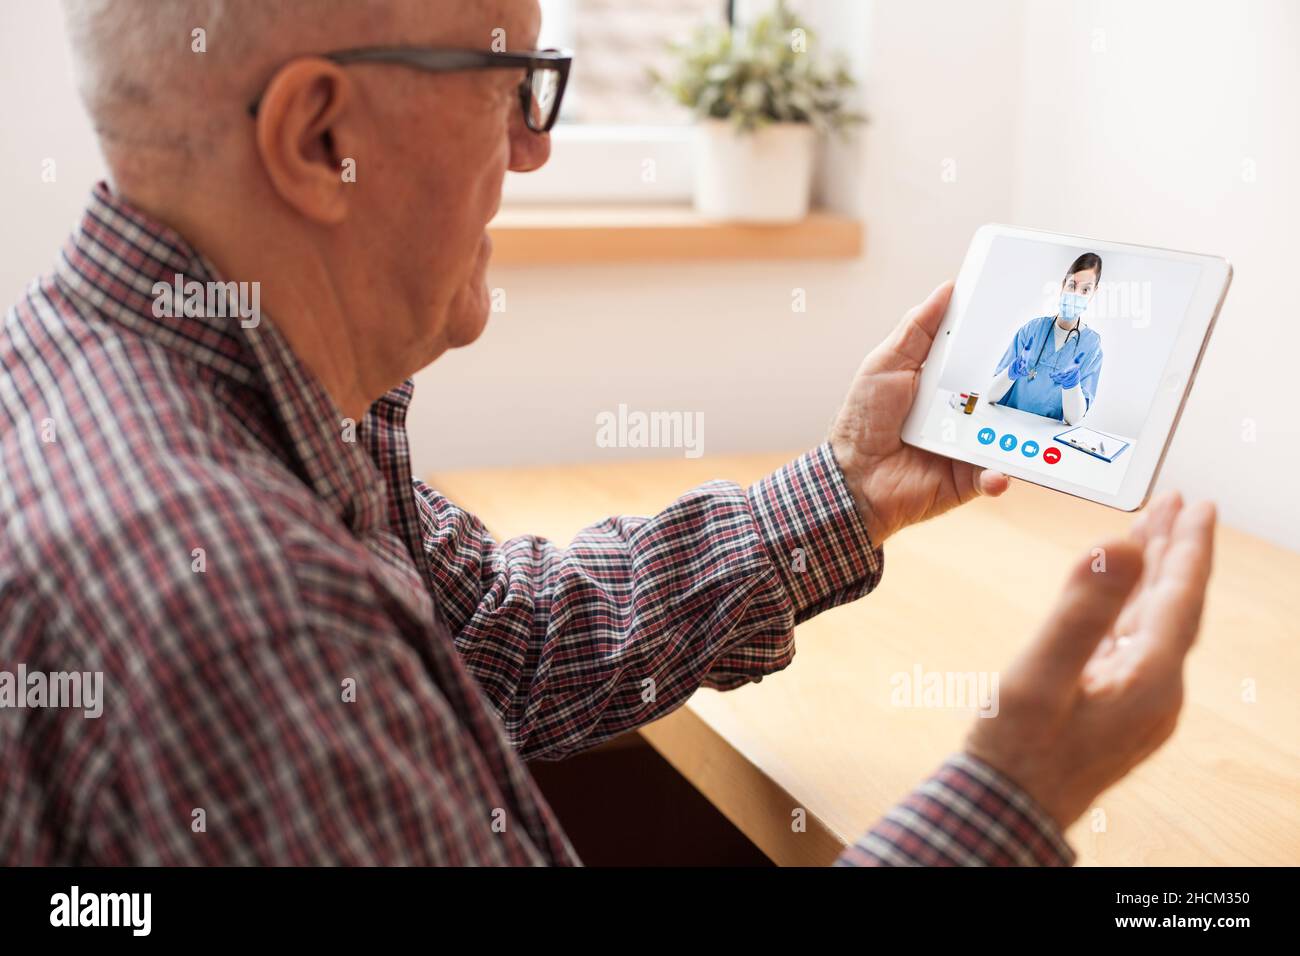 Elderly man talking to female doctor over tabled pad,concept of online on-demand medical help using video calling app,remote distance conversation Stock Photo